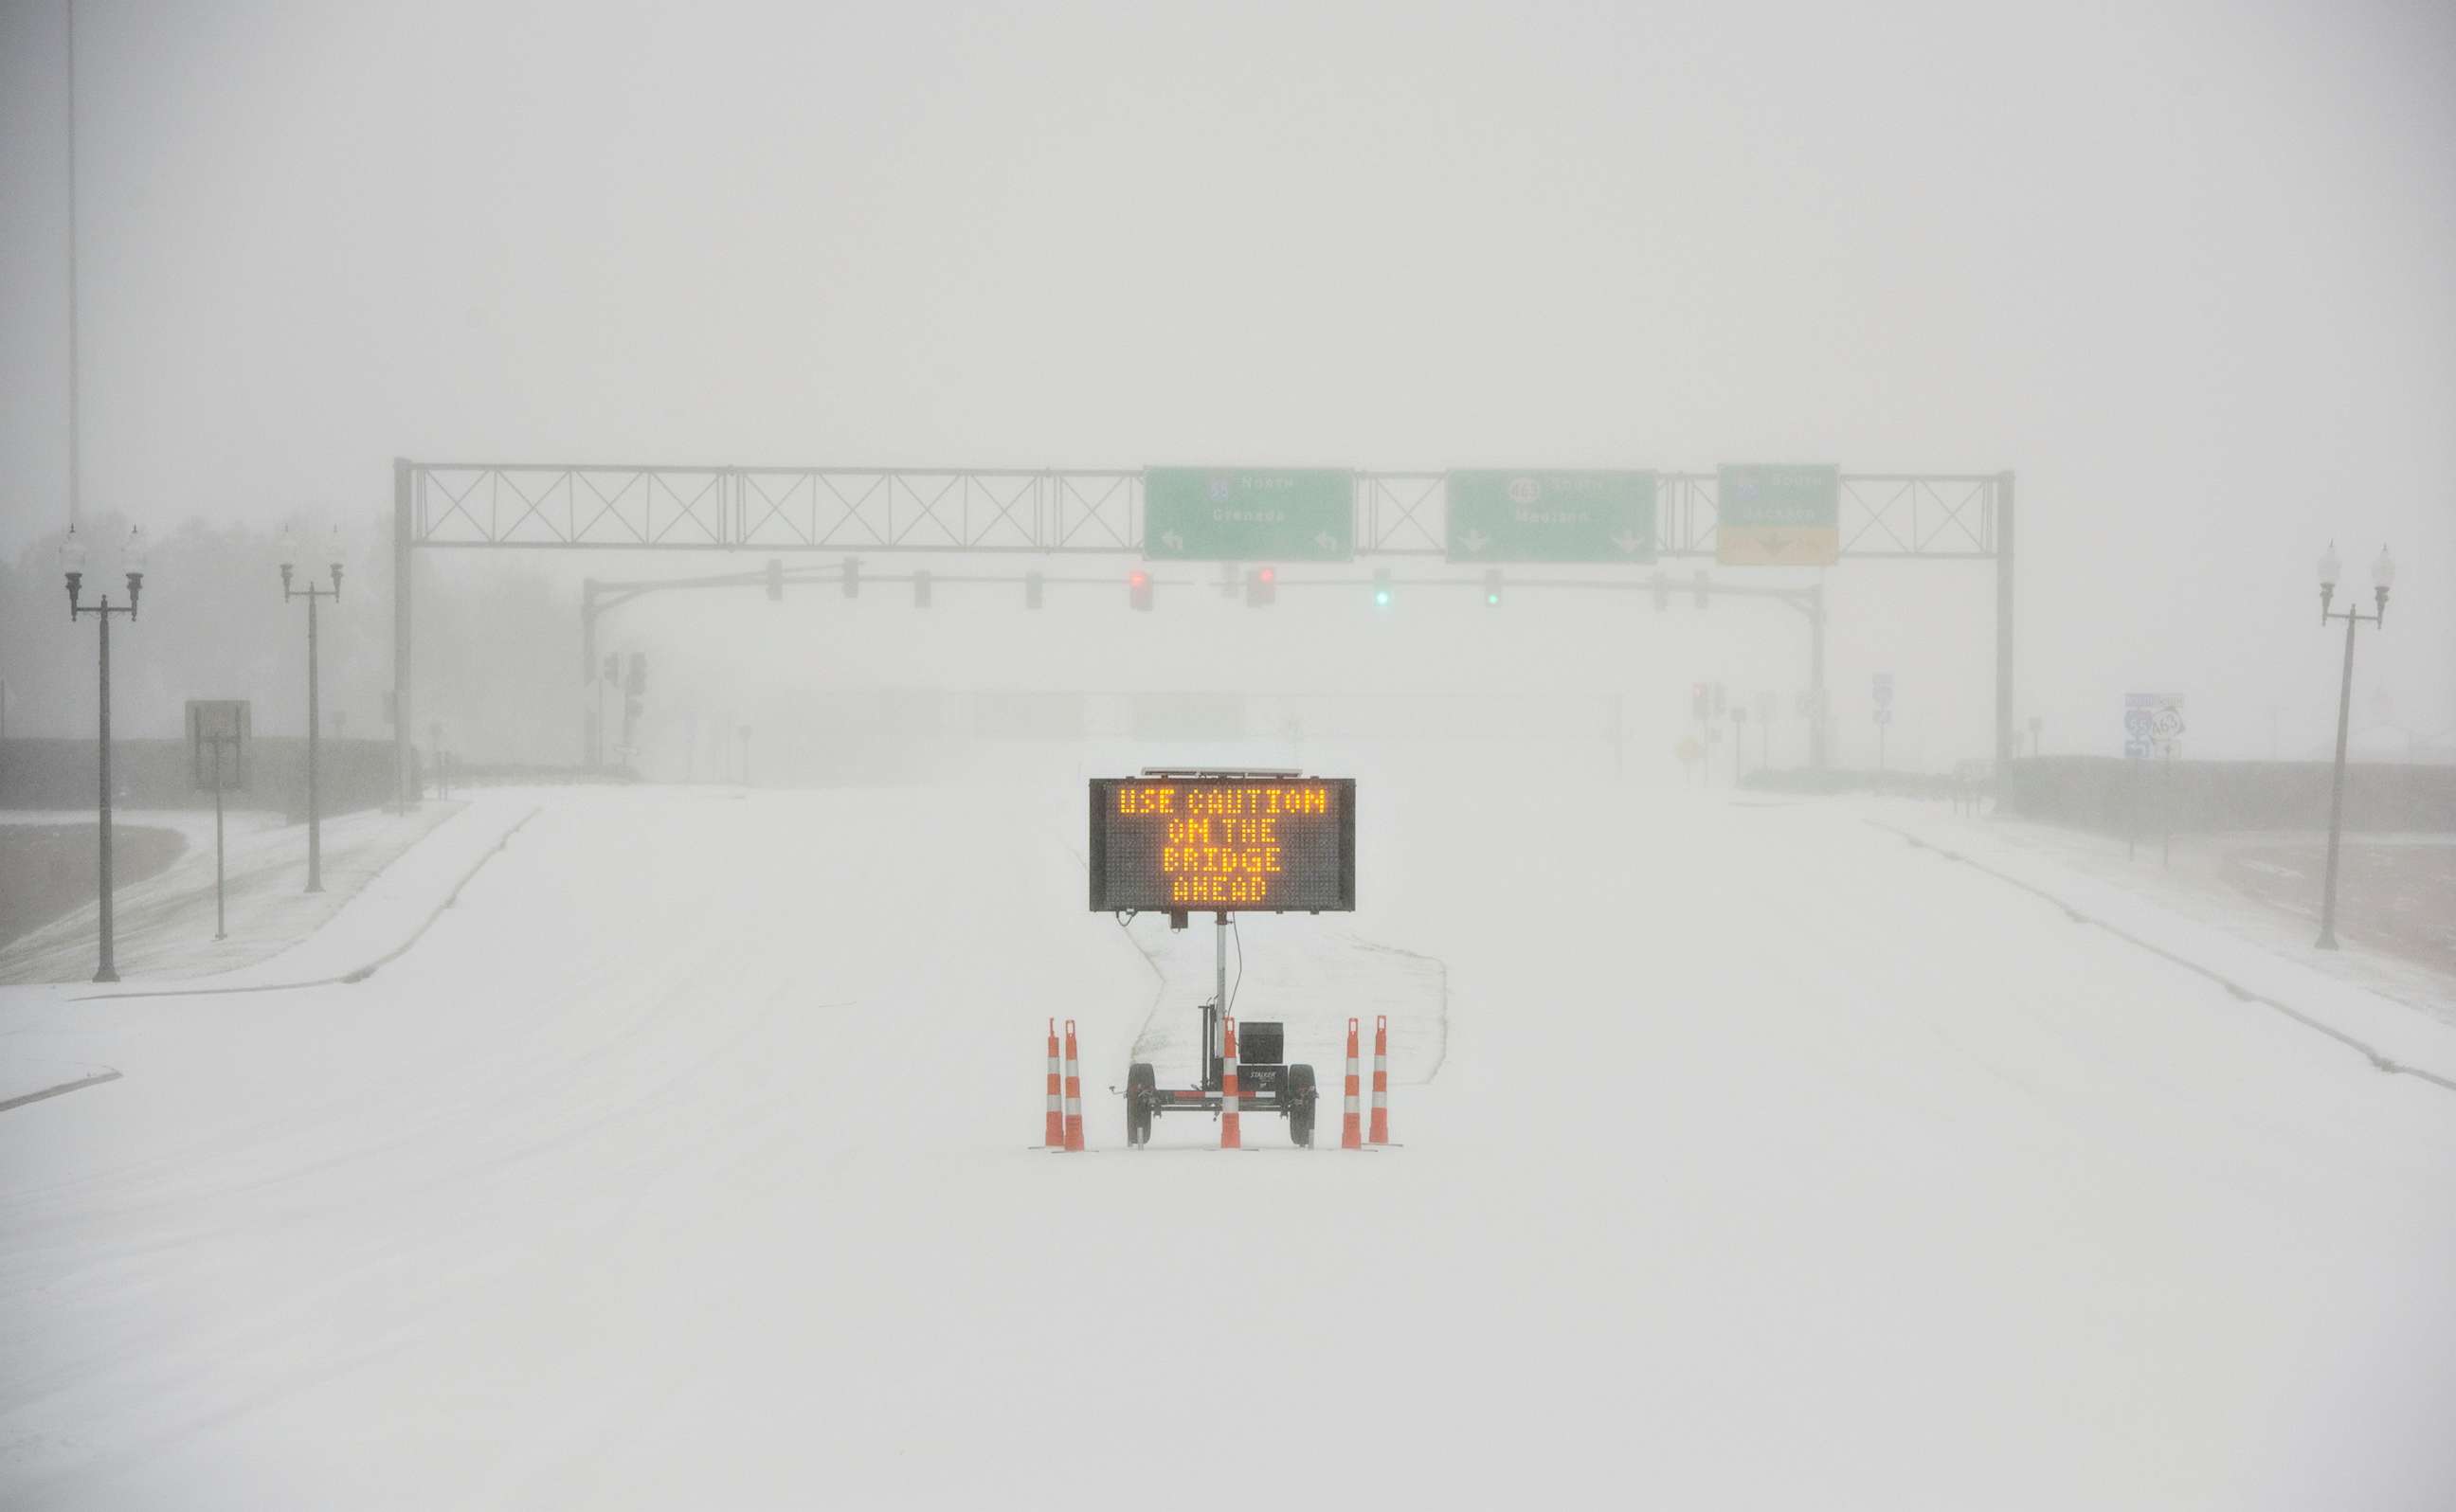 PHOTO: A sign warns motorists after a sudden heavy bout of snow and frozen rain on MS Highway 463 in Madison, north of Jackson, Miss., Feb. 15, 2021.